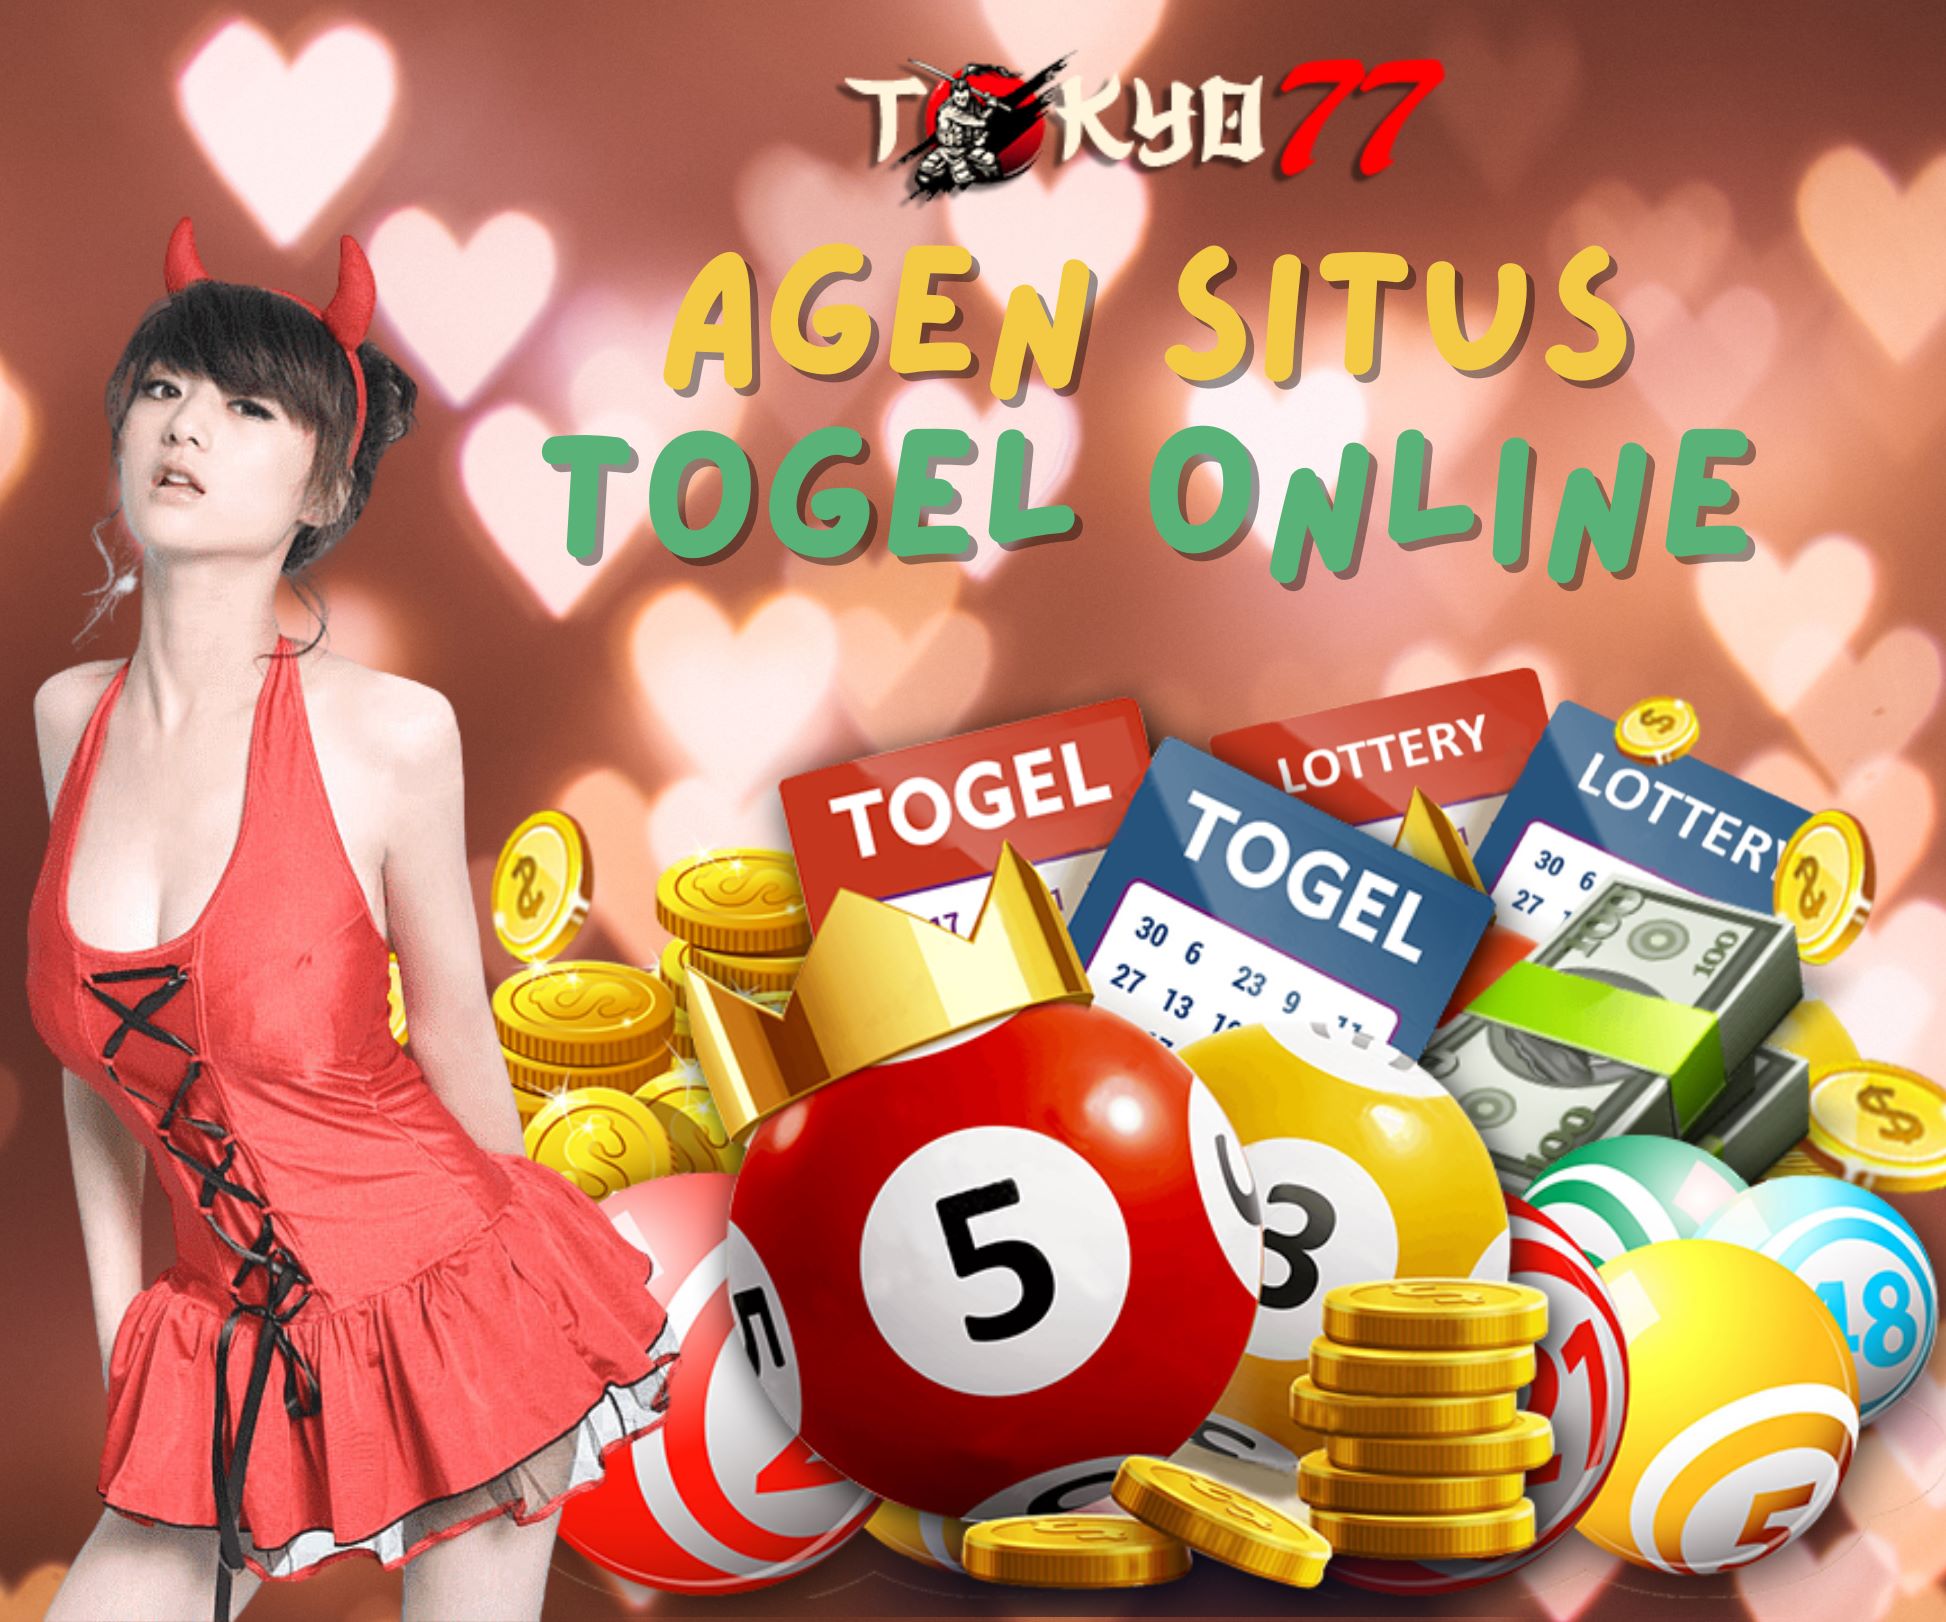 The Special Beauty of Togel Online Games